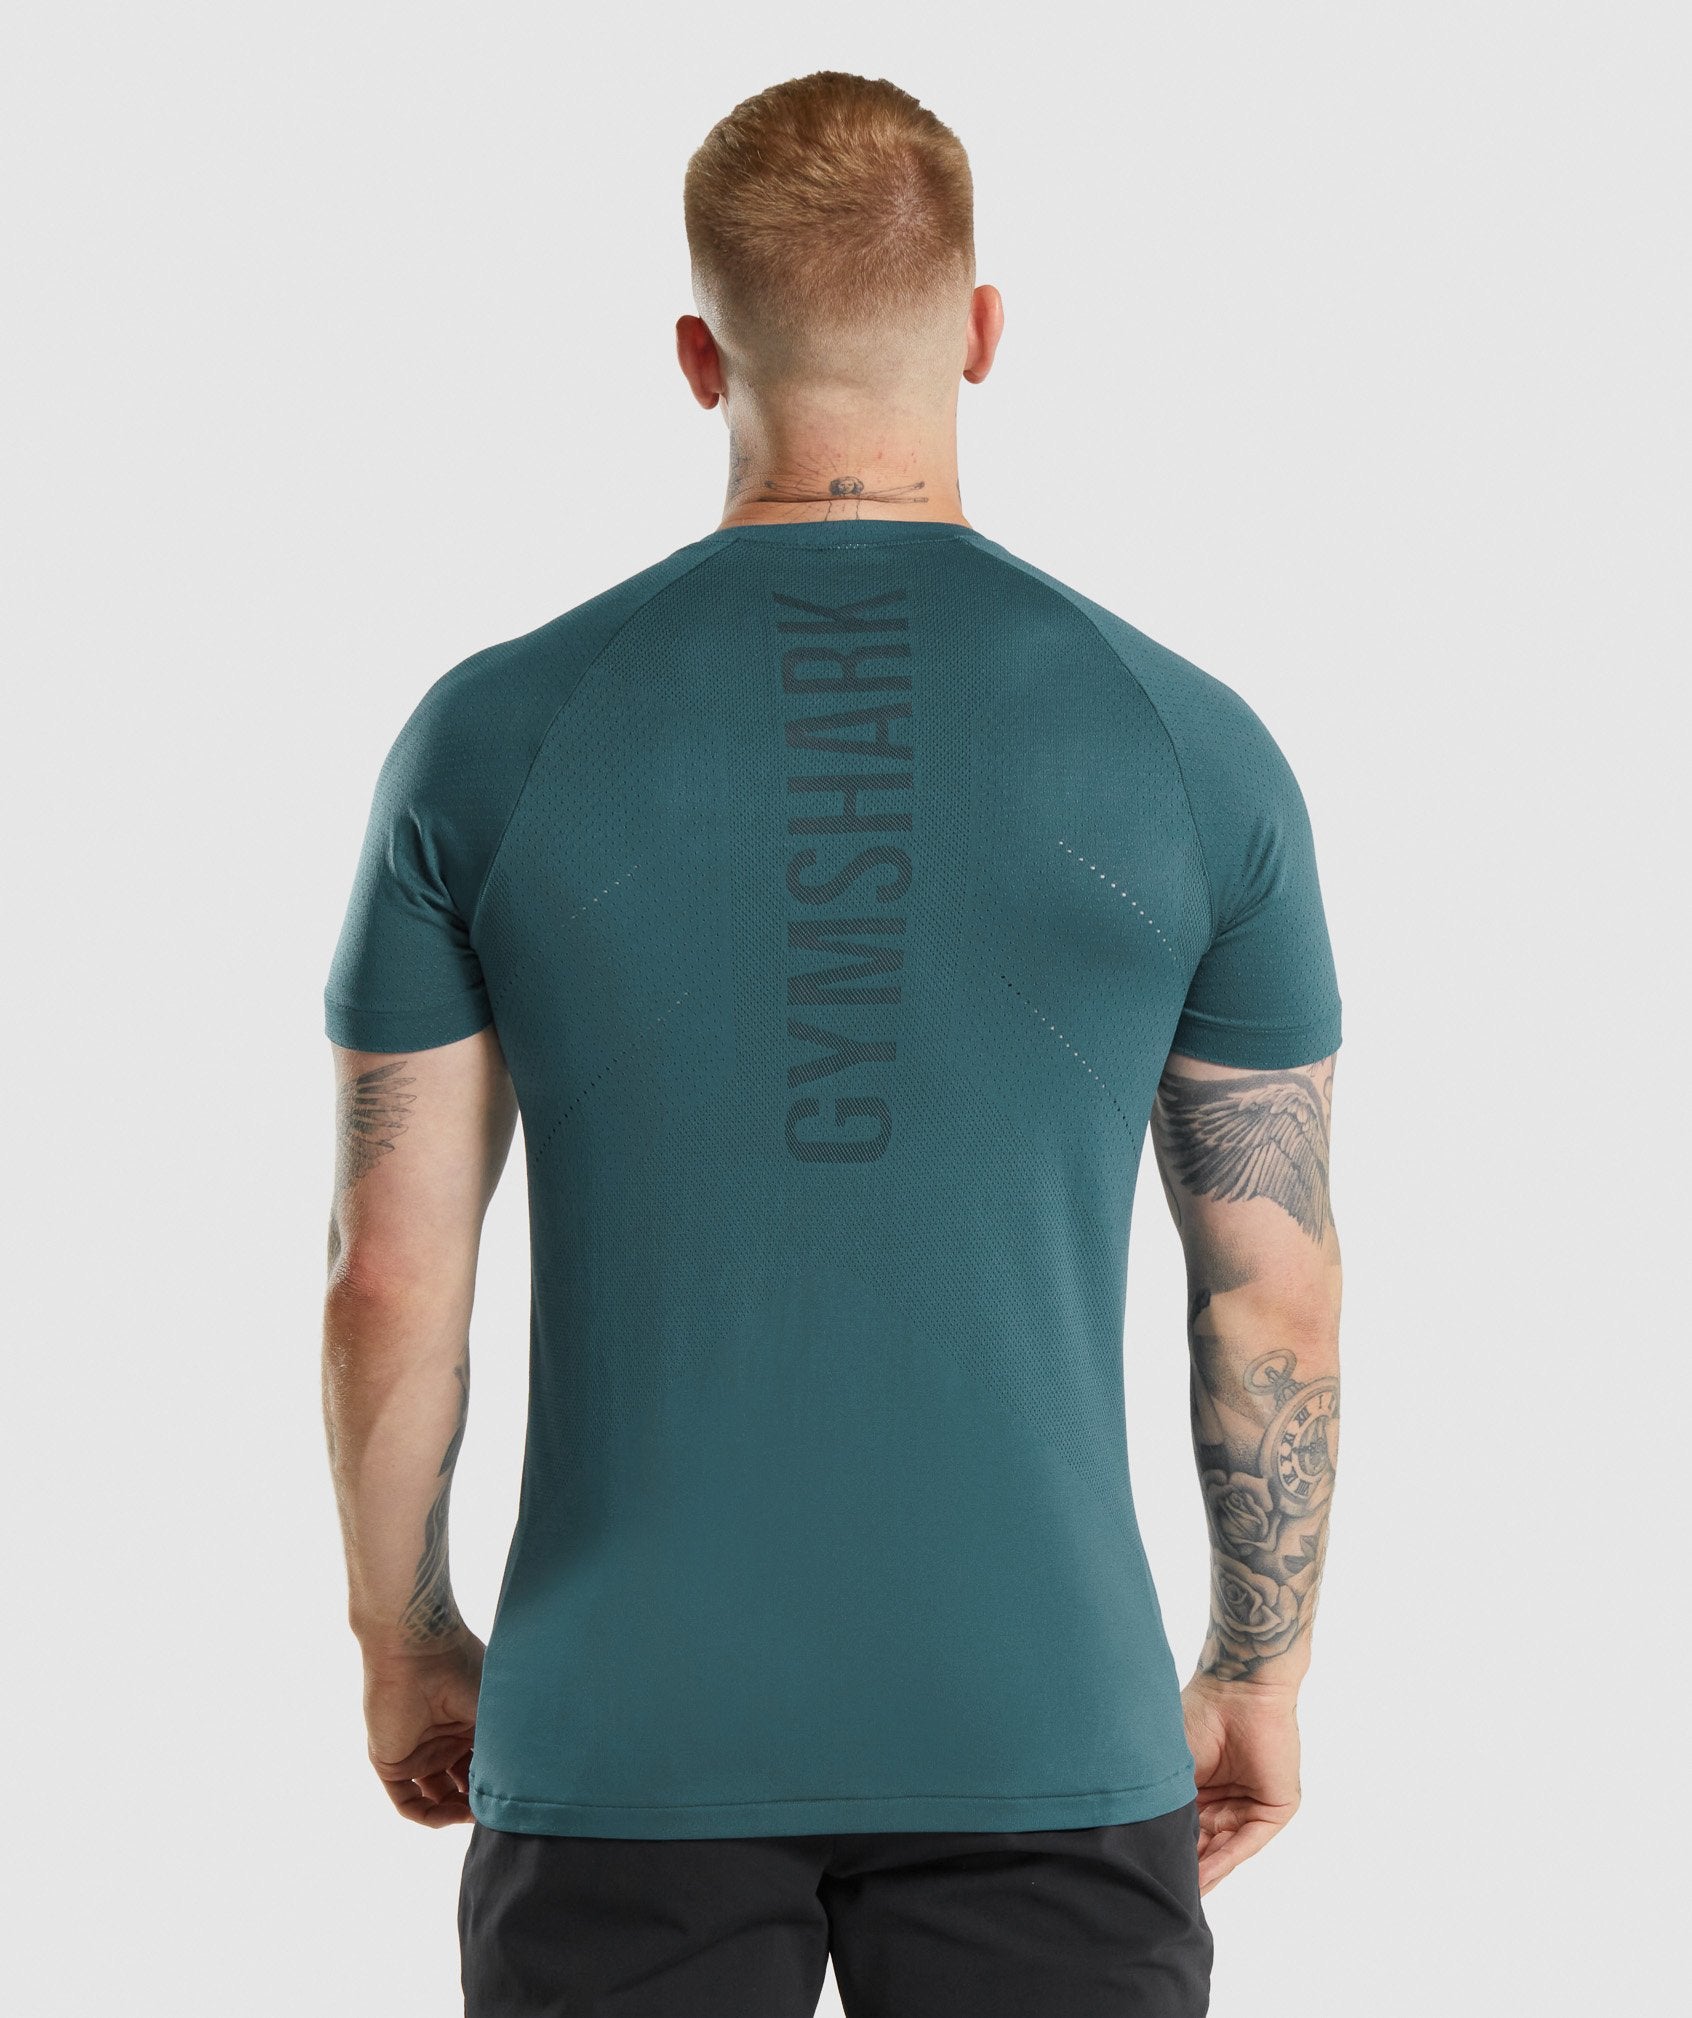 Apex Perform T-Shirt in Teal - view 3